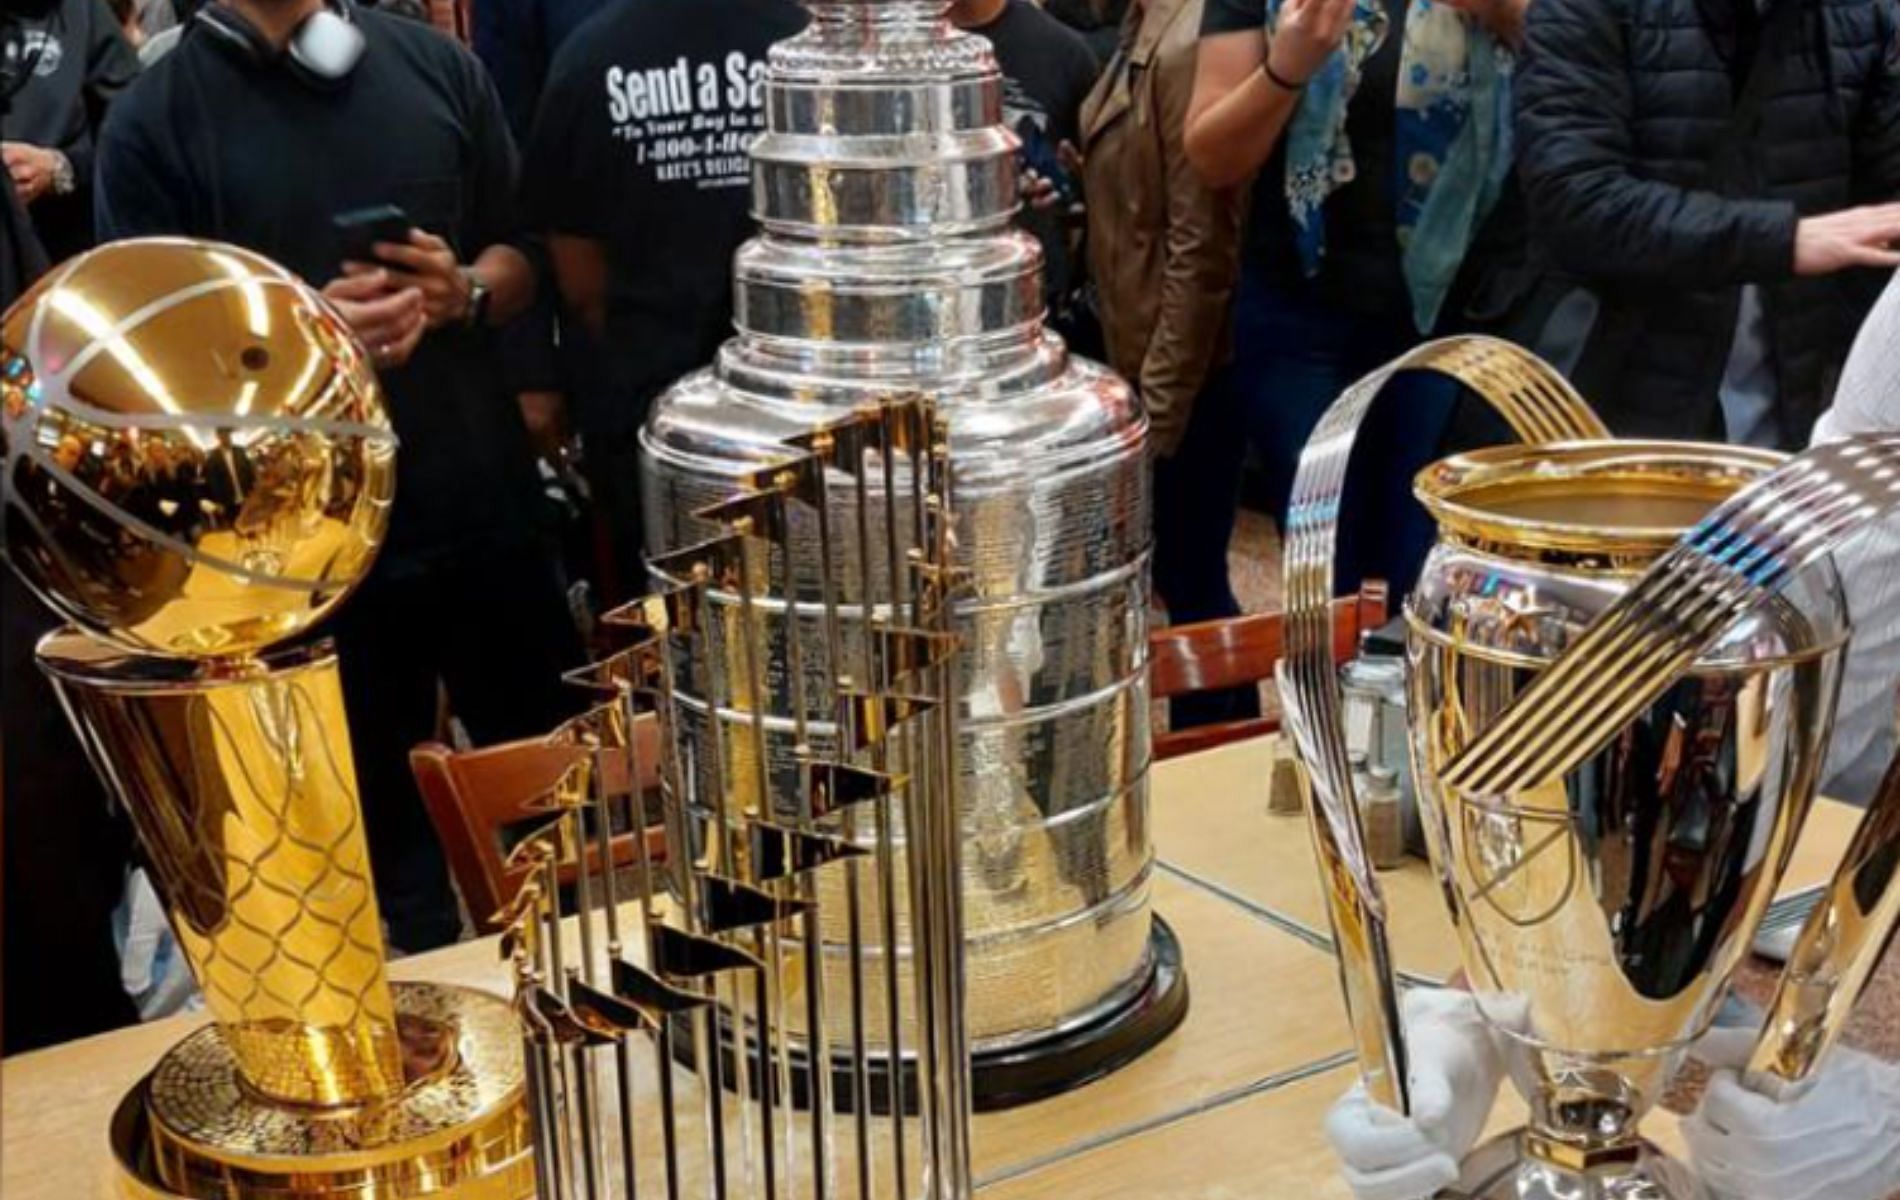 A boy looks at the Larry O'Brien Trophy that was on display during